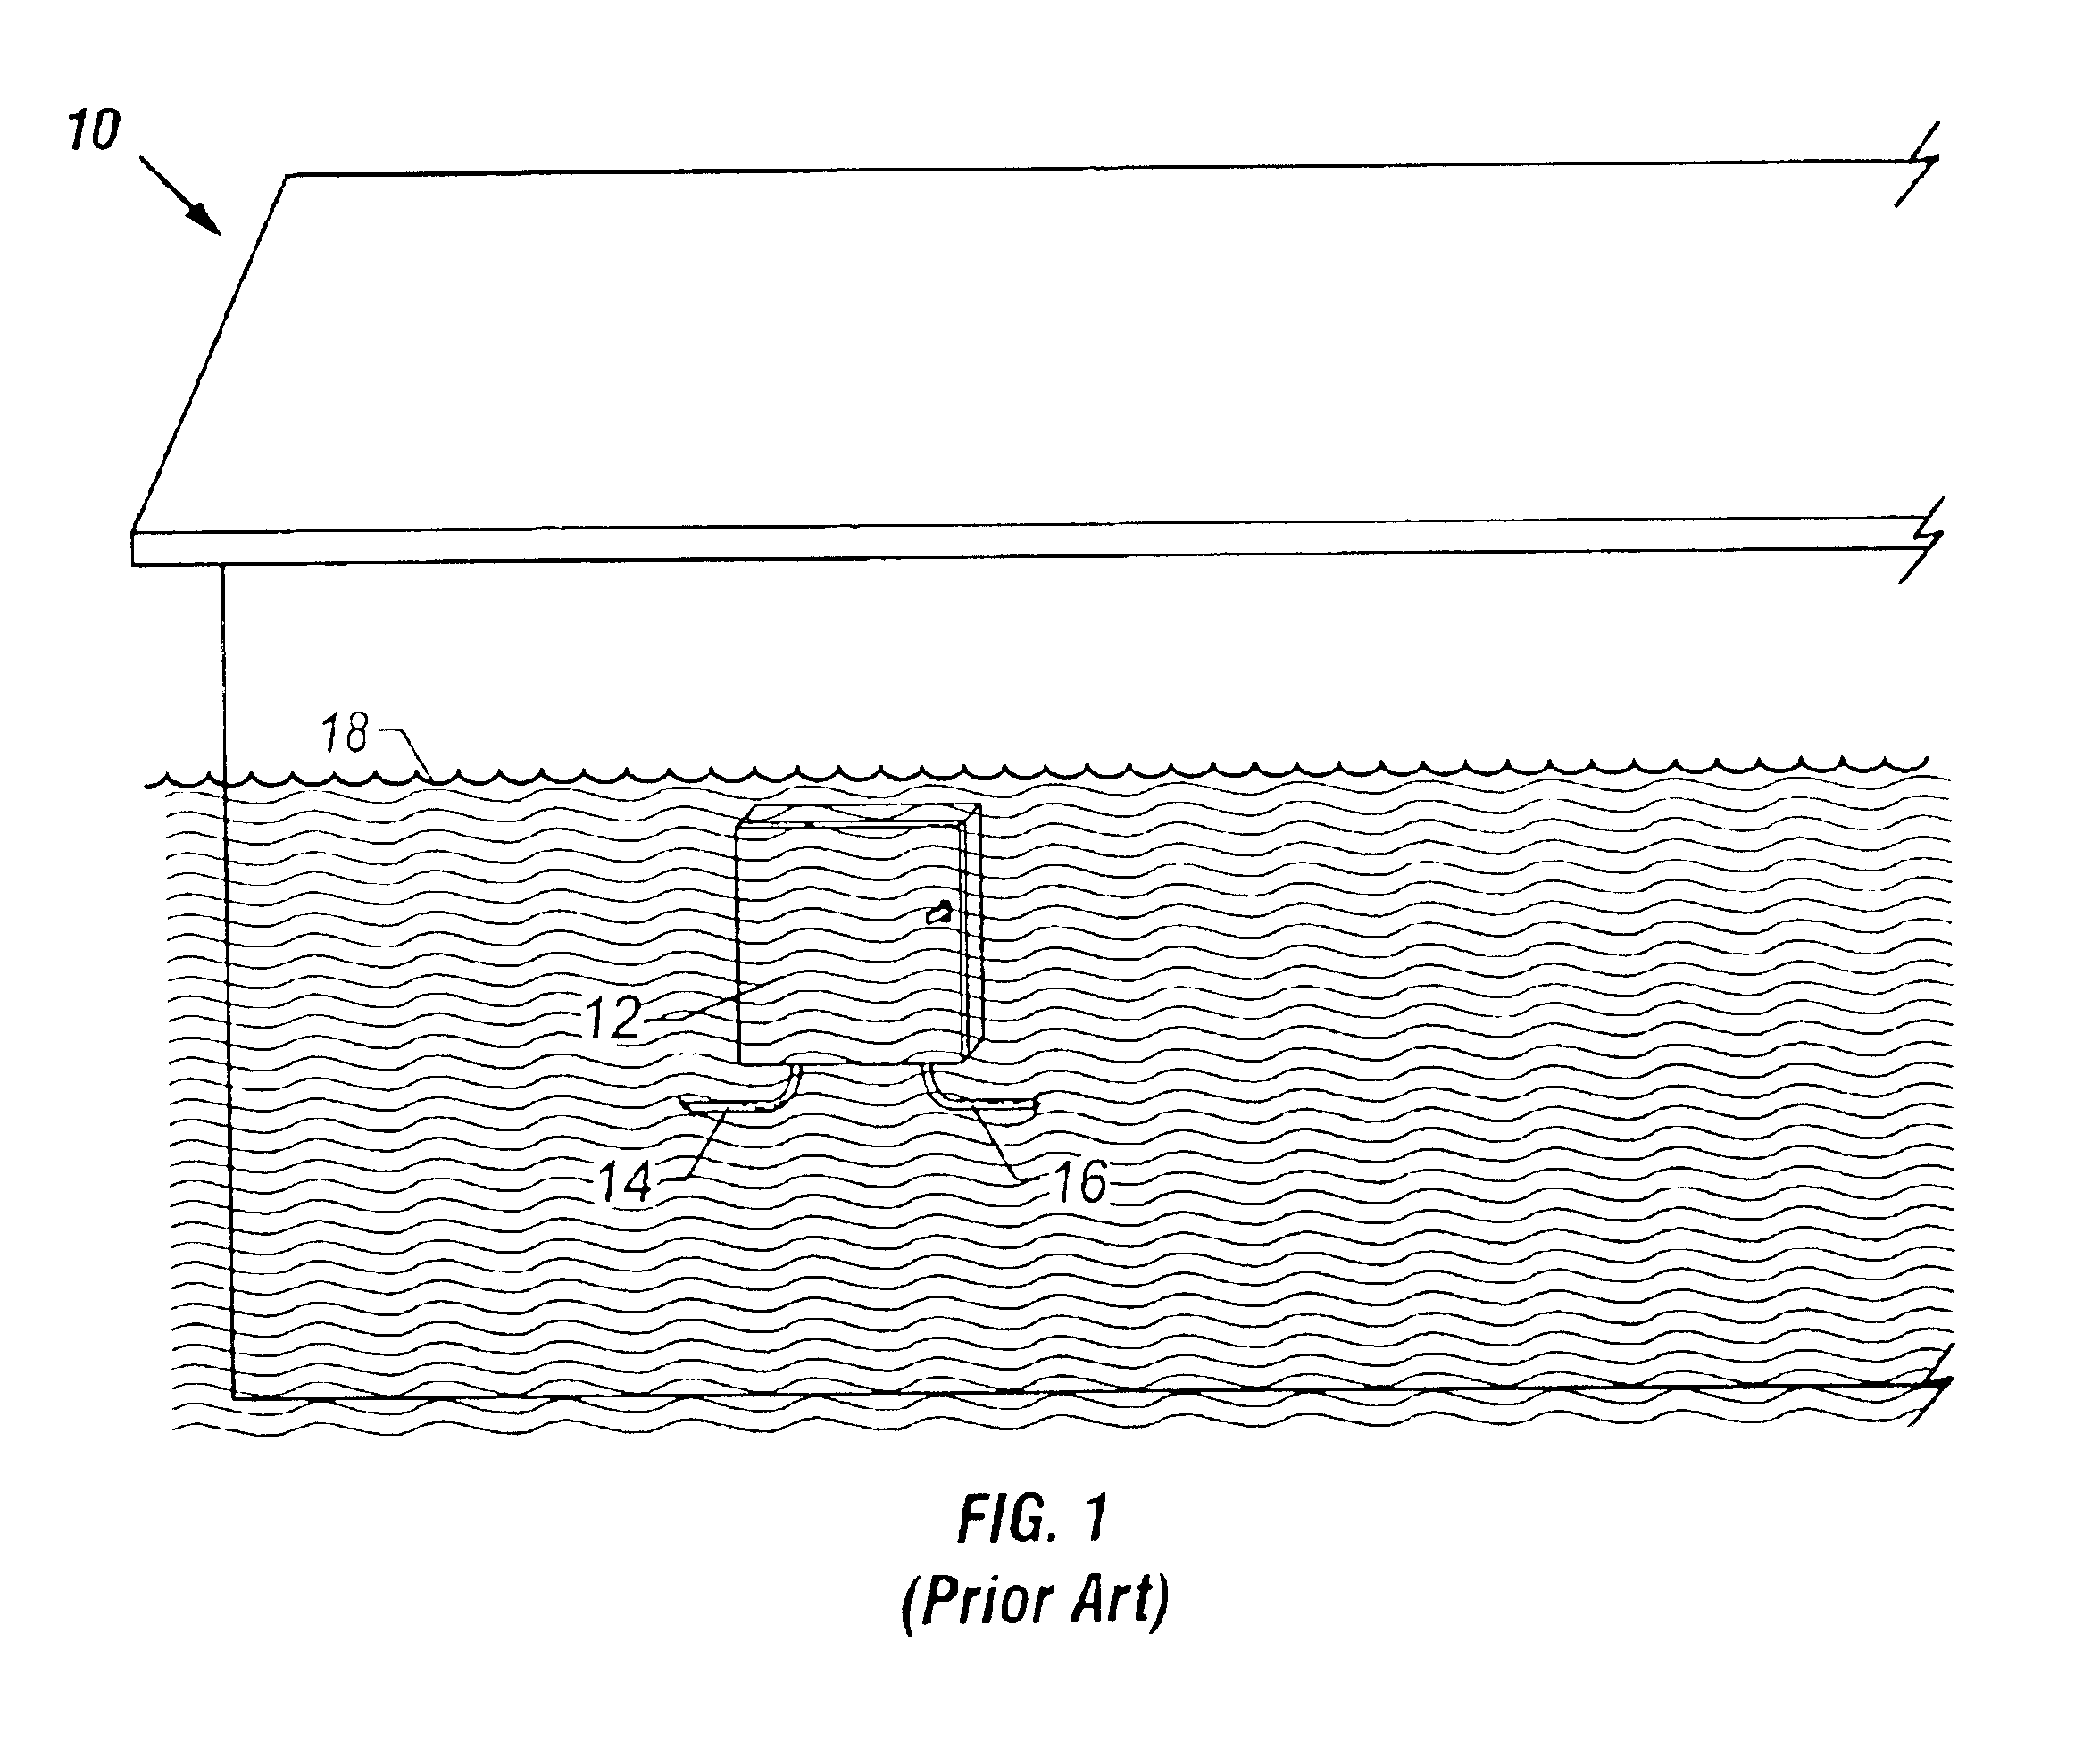 Sealed terminating device